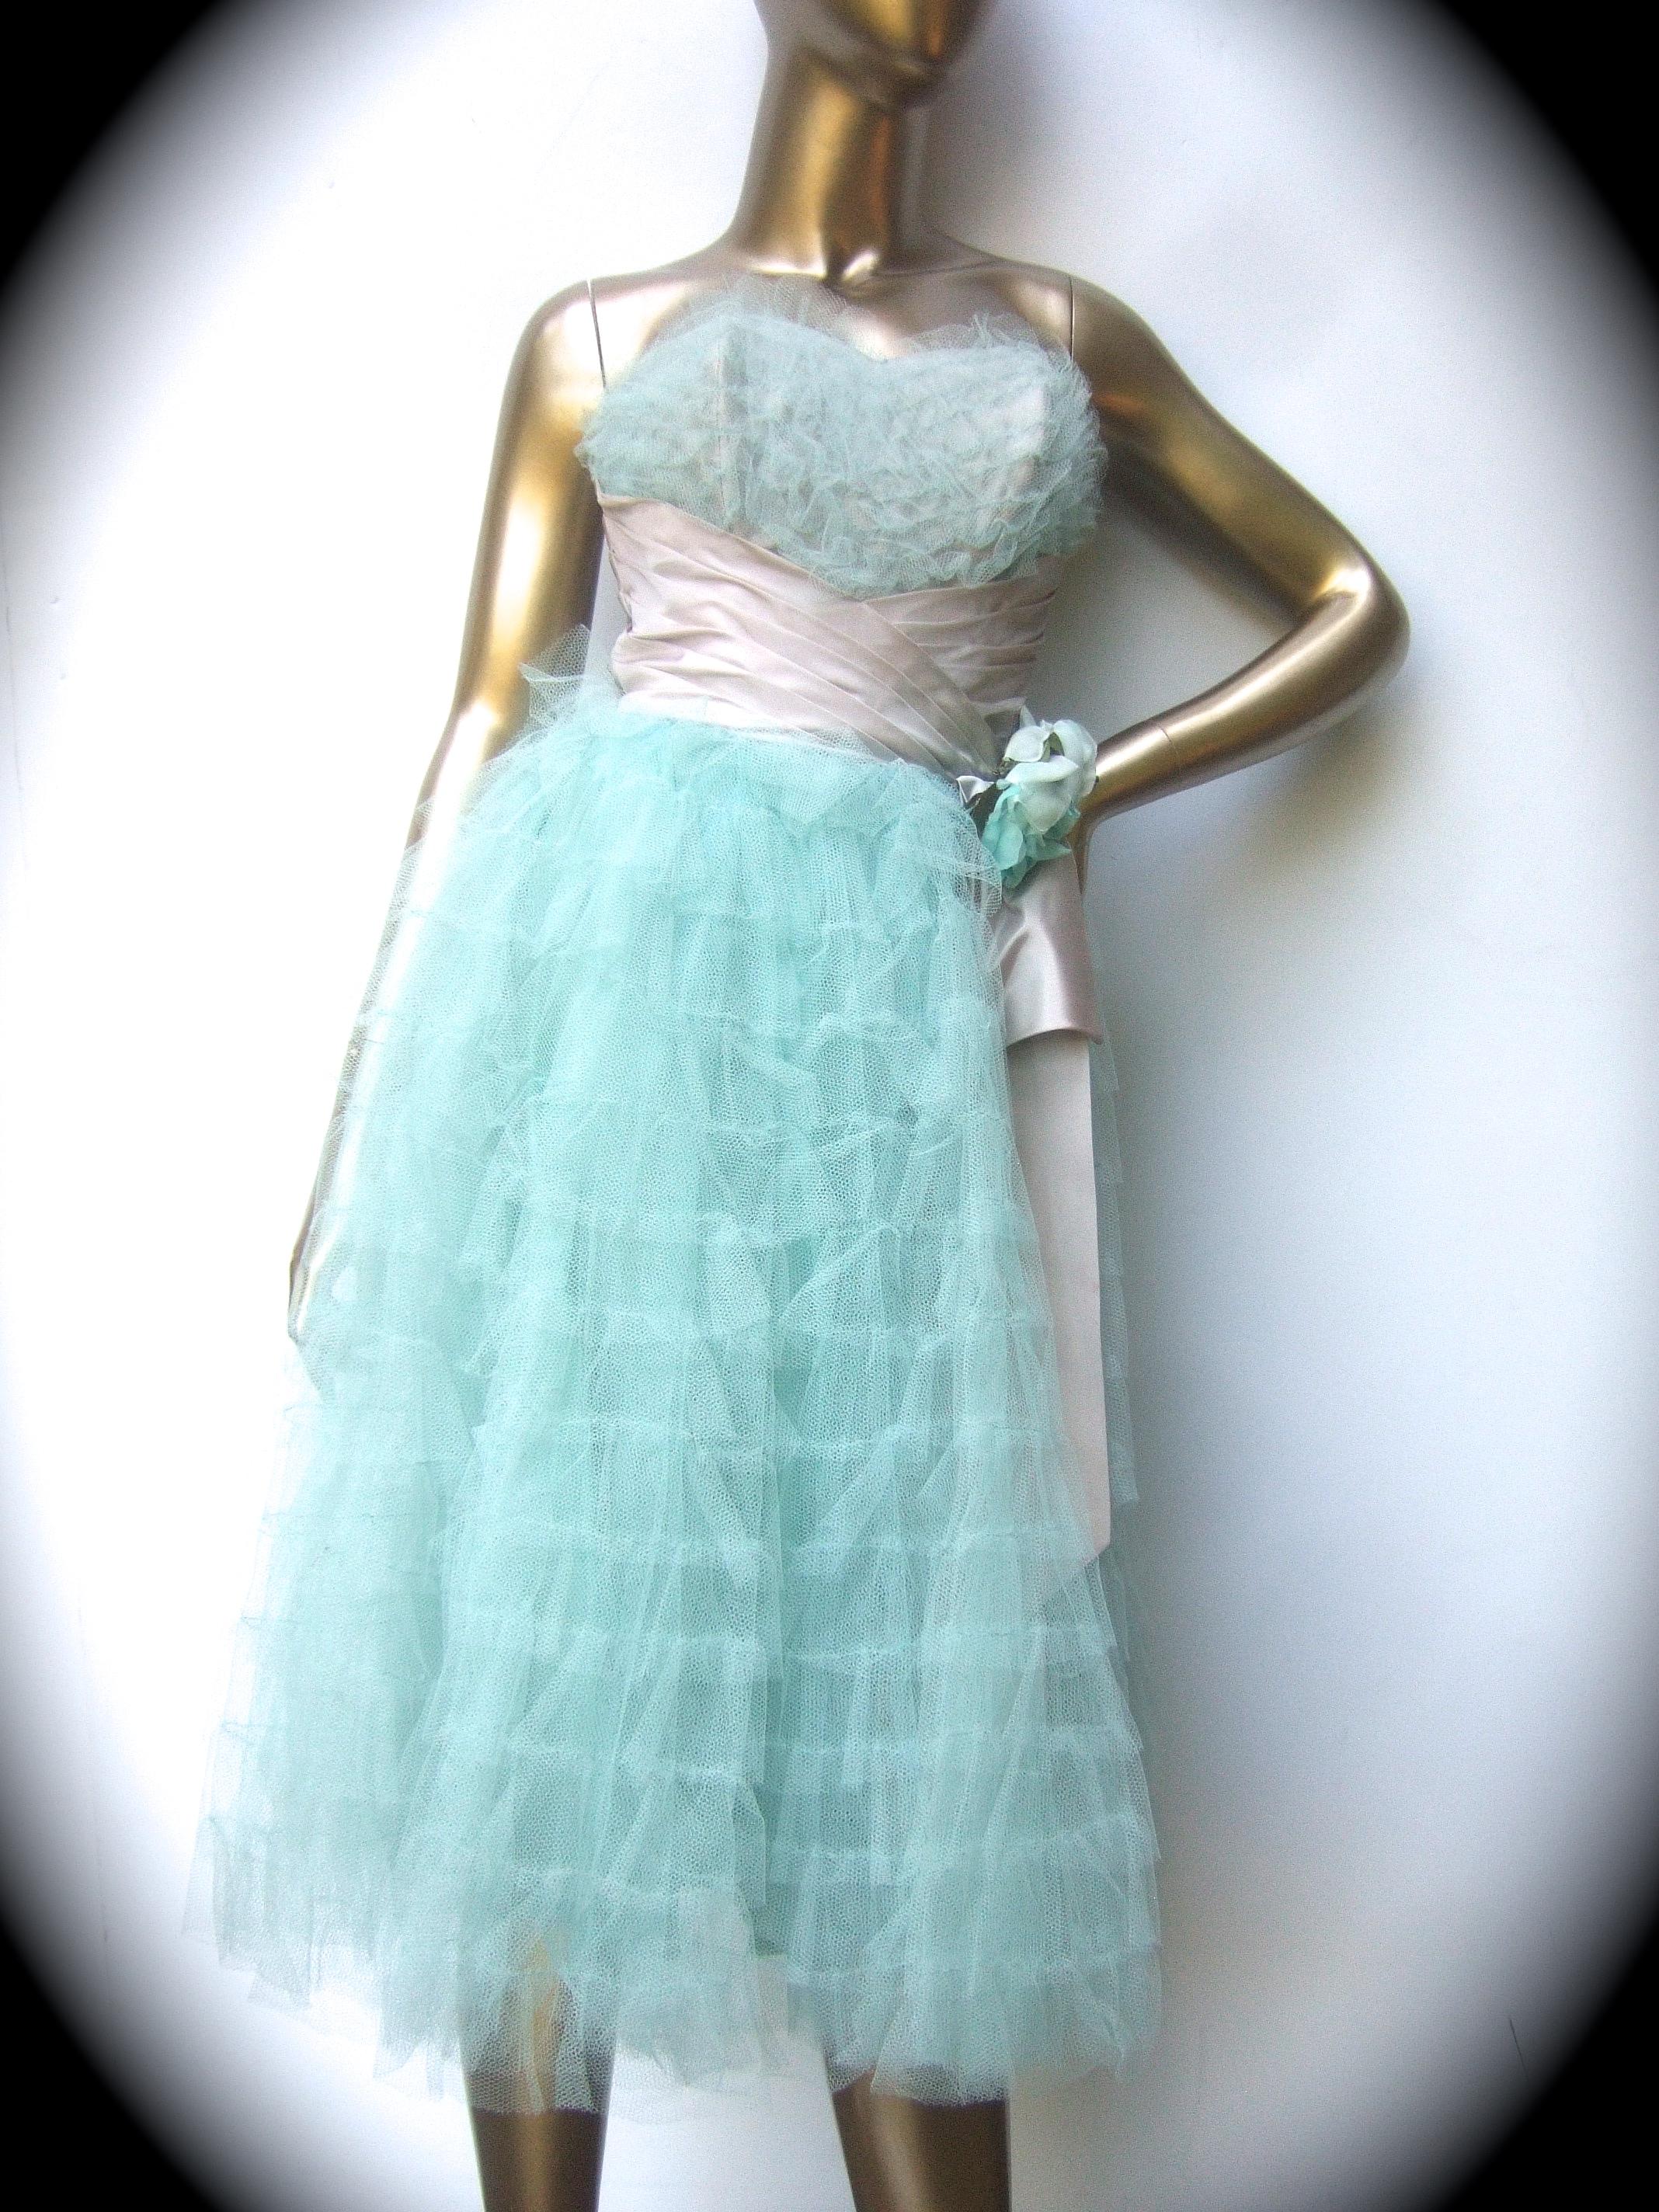 Saks Fifth Avenue Frothy Robin's Egg Pale Blue Tulle Dress c 1950s  8